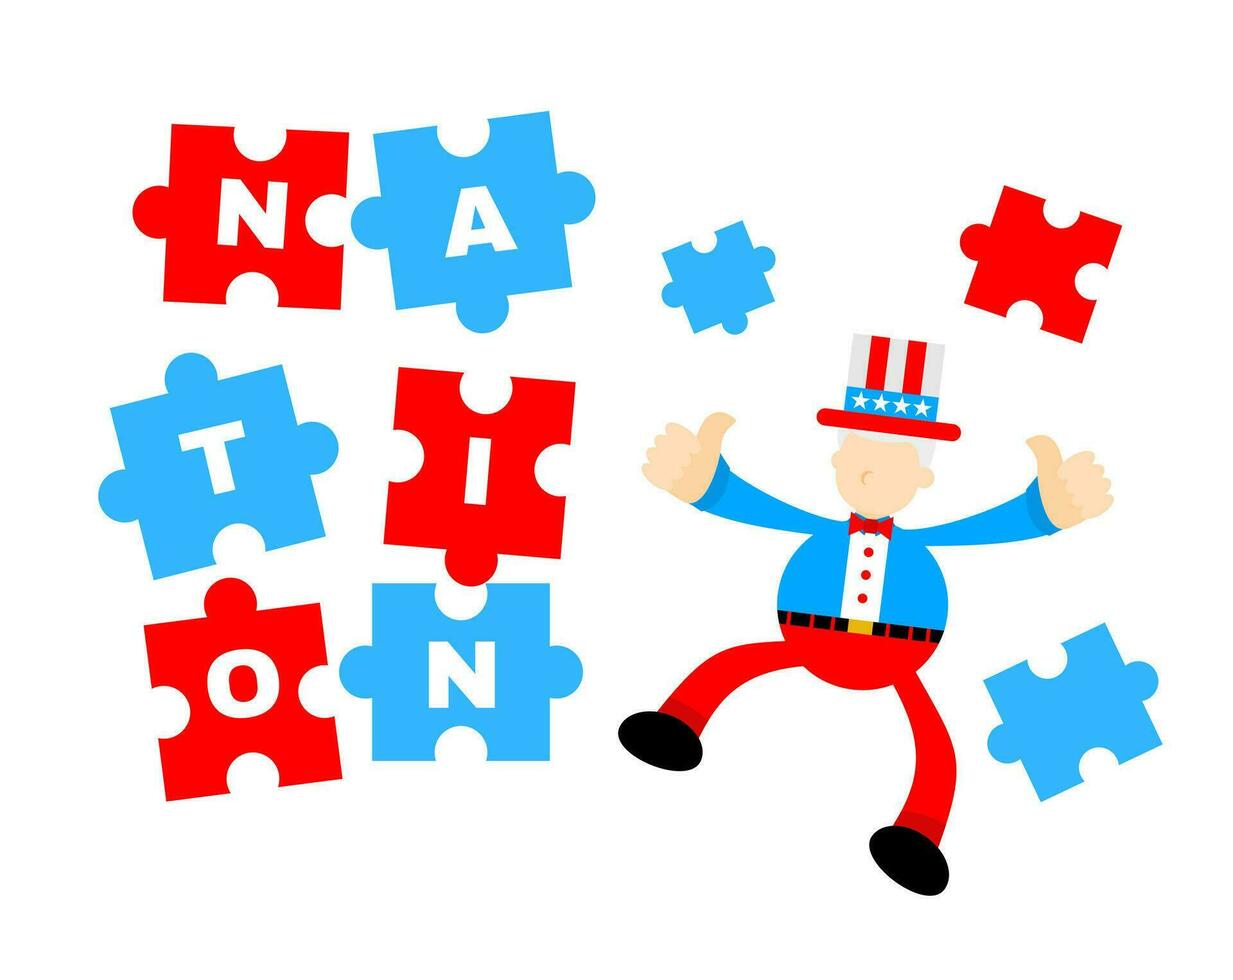 uncle sam america nation word puzzle cartoon doodle flat design style vector illustration